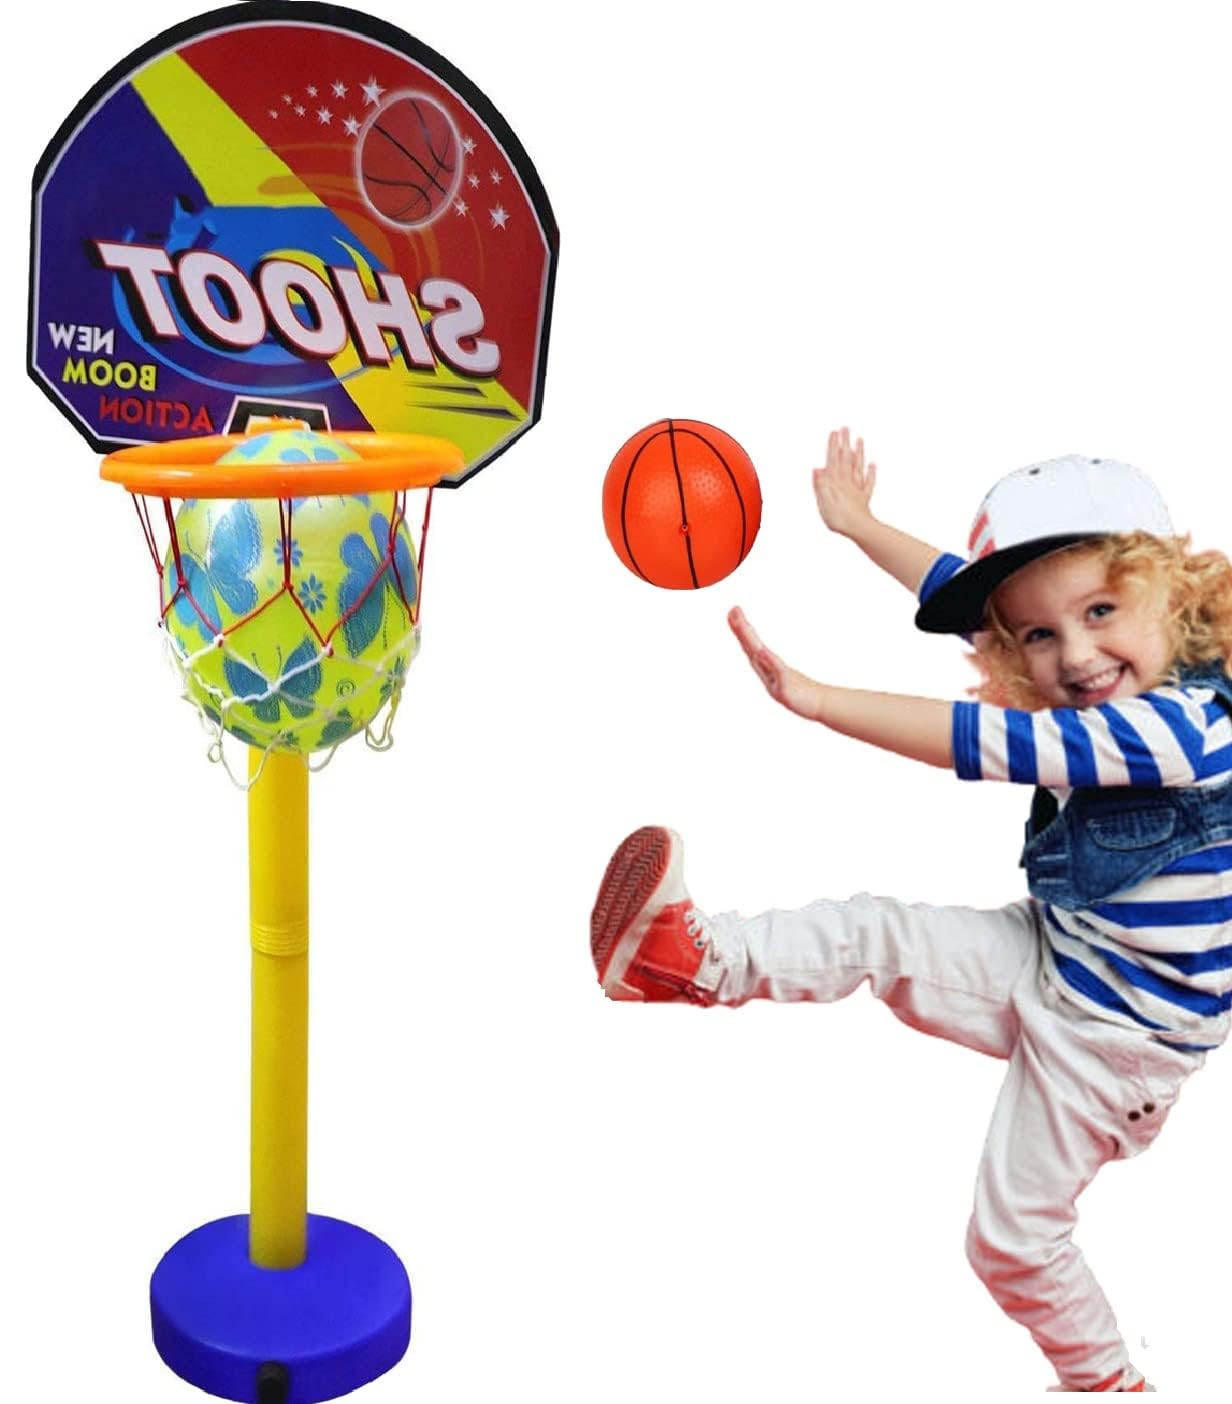 Pelo Basketball Game Set for Kids Best Gift Item for Kids Sports Toy Basket Ball Set for Girls and Boys Kids Game with Adjustable Length Multi Color Pack of 1